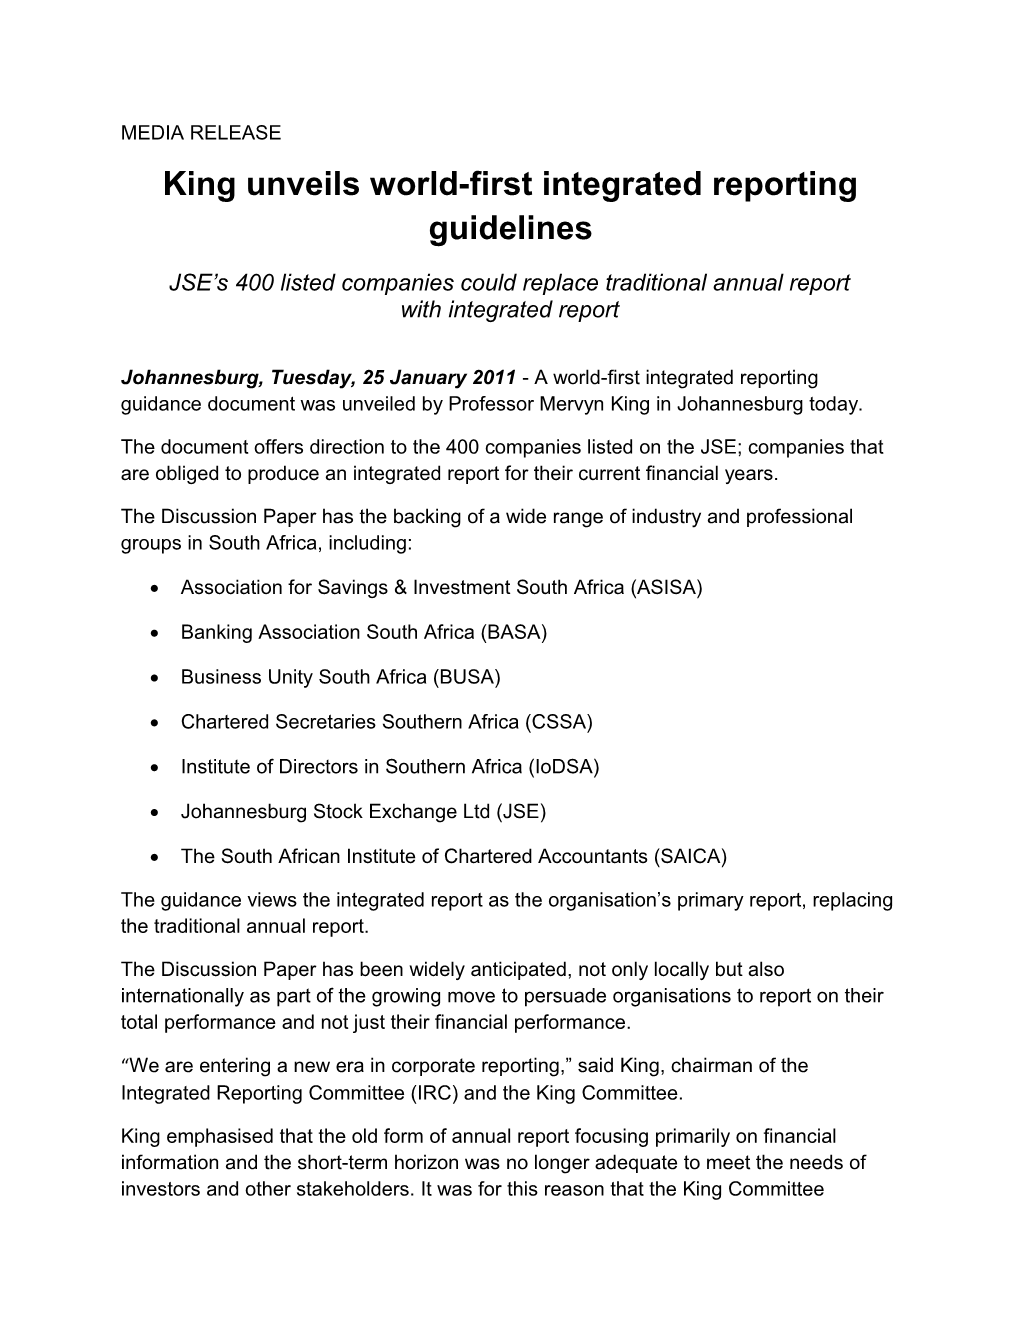 King Unveils World-First Integrated Reporting Guidelines